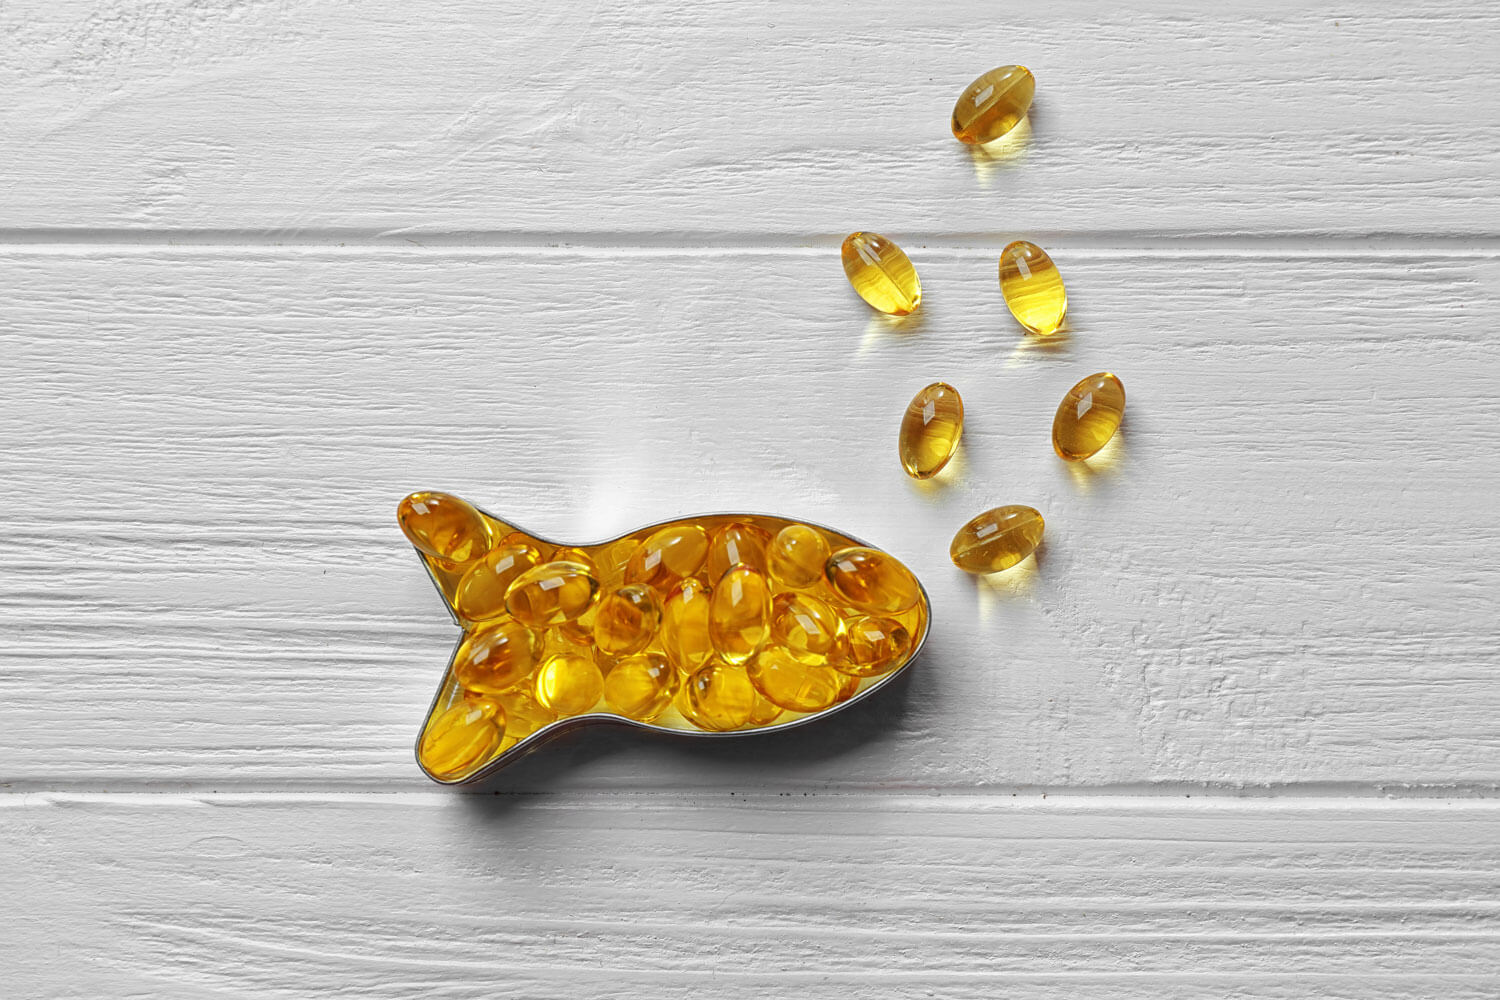 benefits of fish oil for dogs